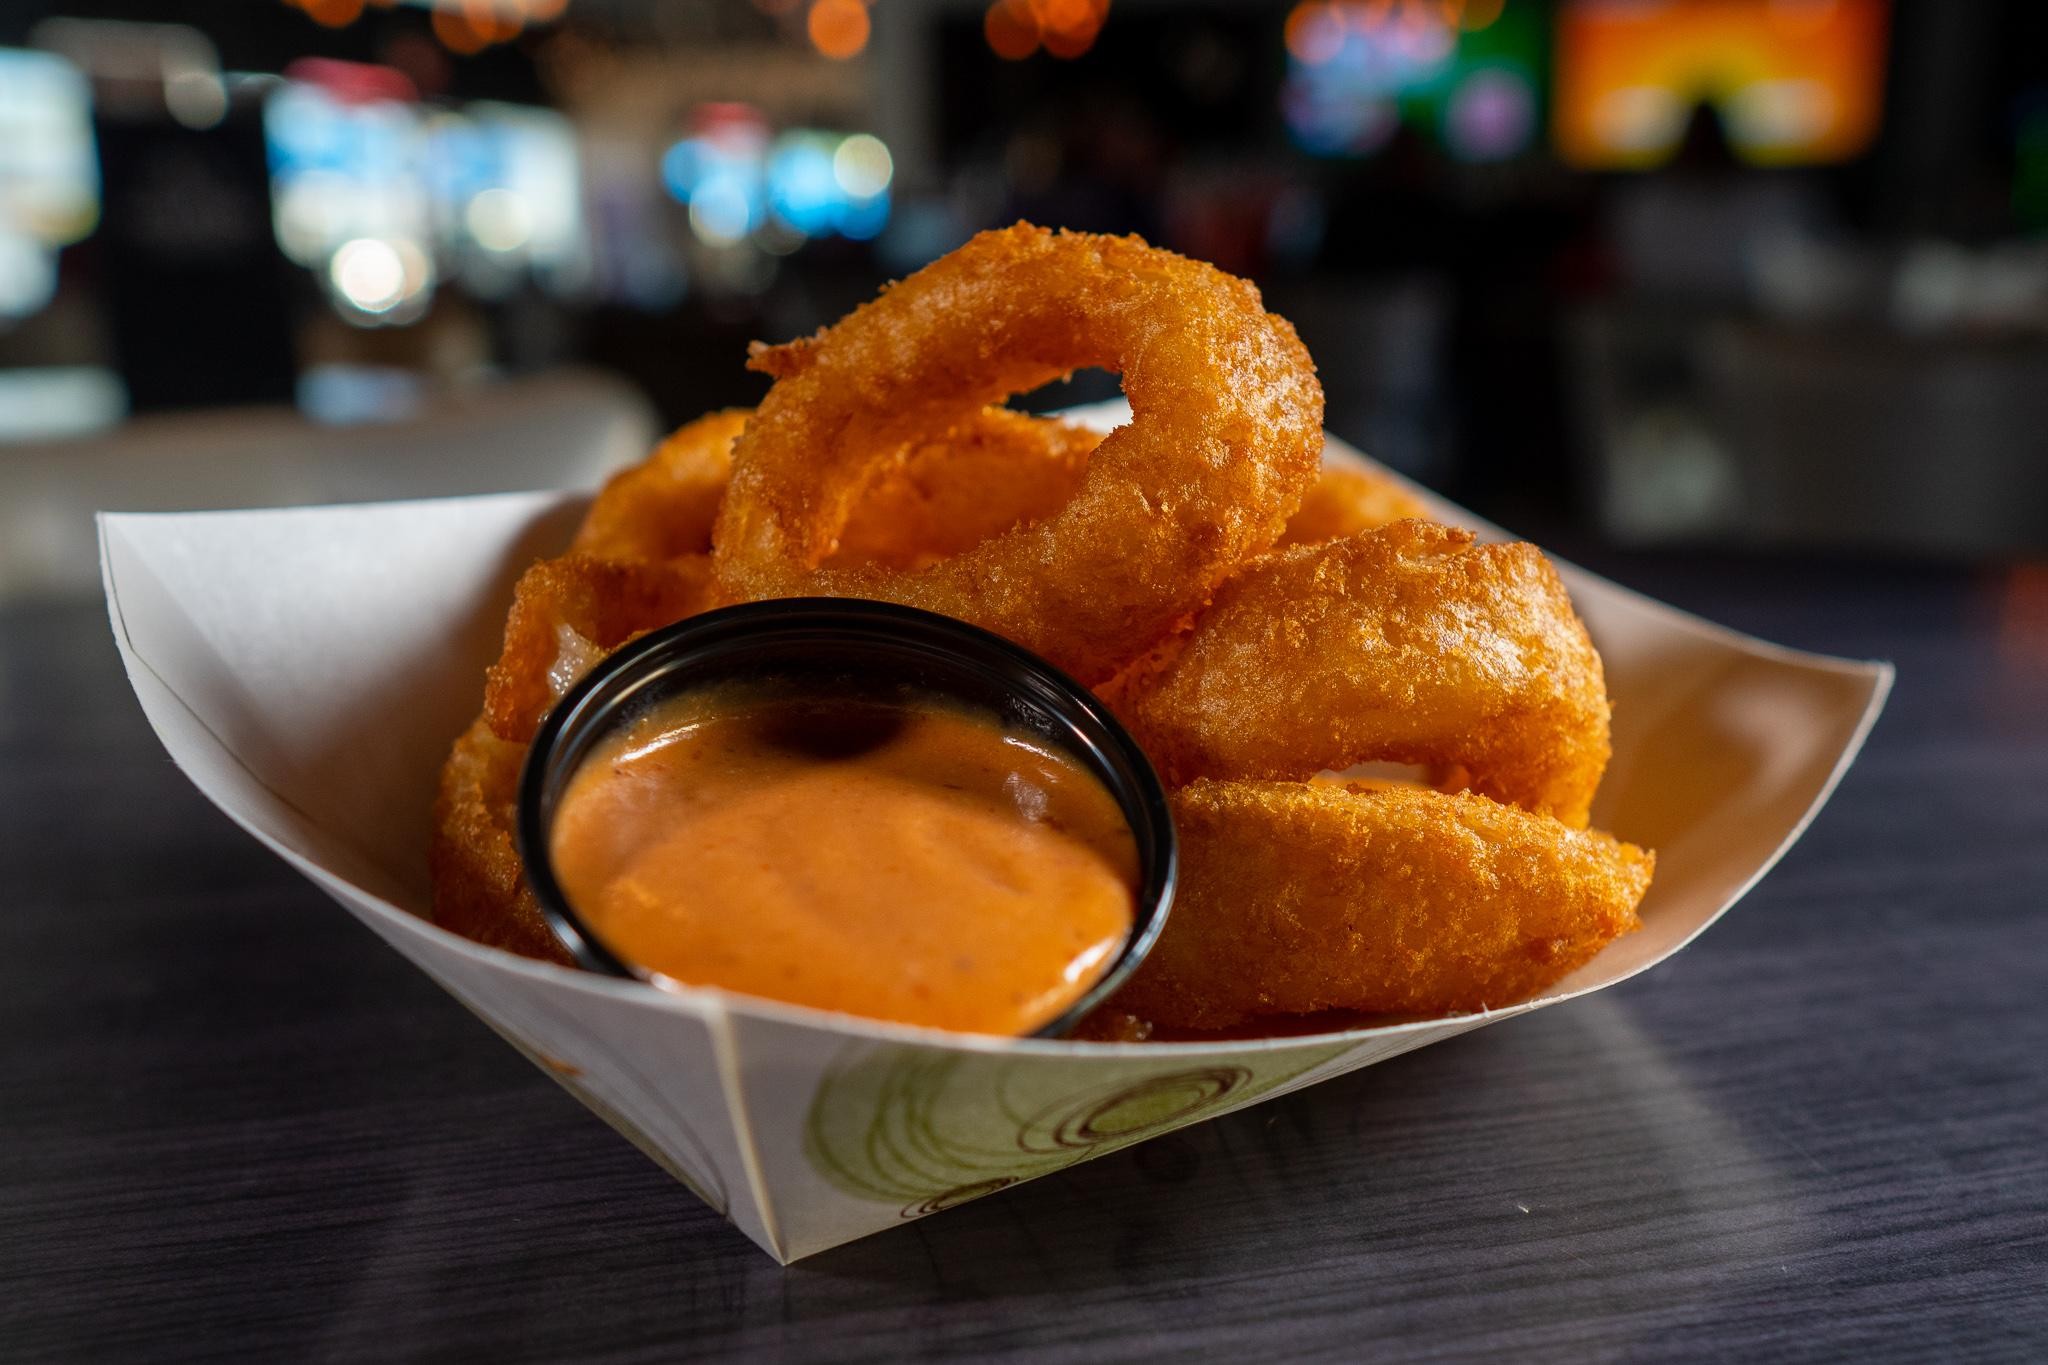 HAND CRAFTED ONION RINGS